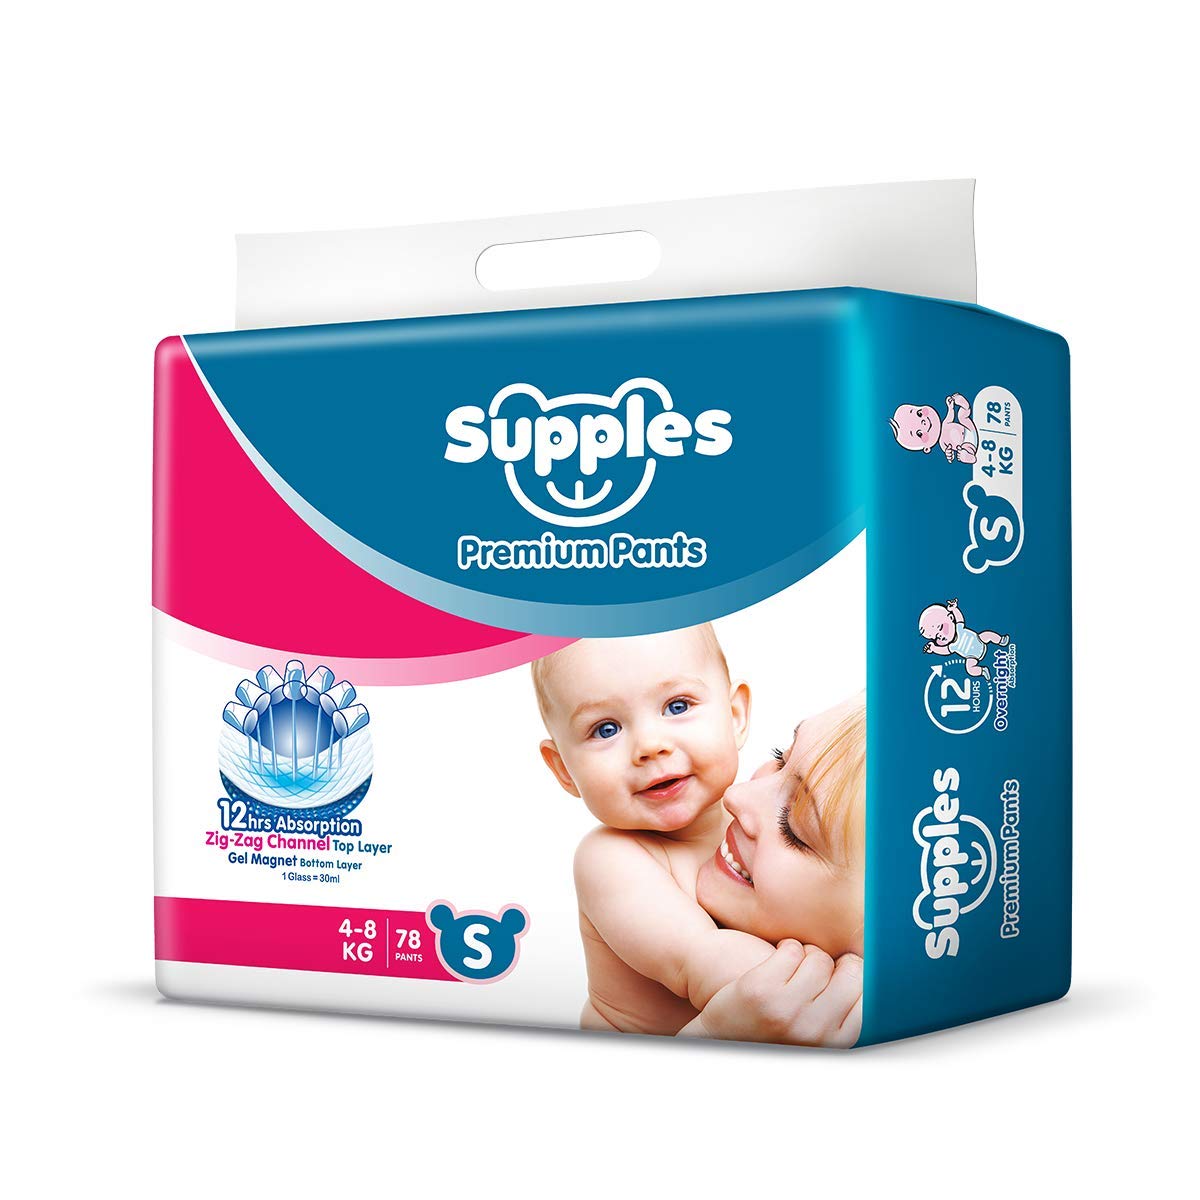 Supples Baby Pants Diapers, Small (4 - 8 kg), 78 Count